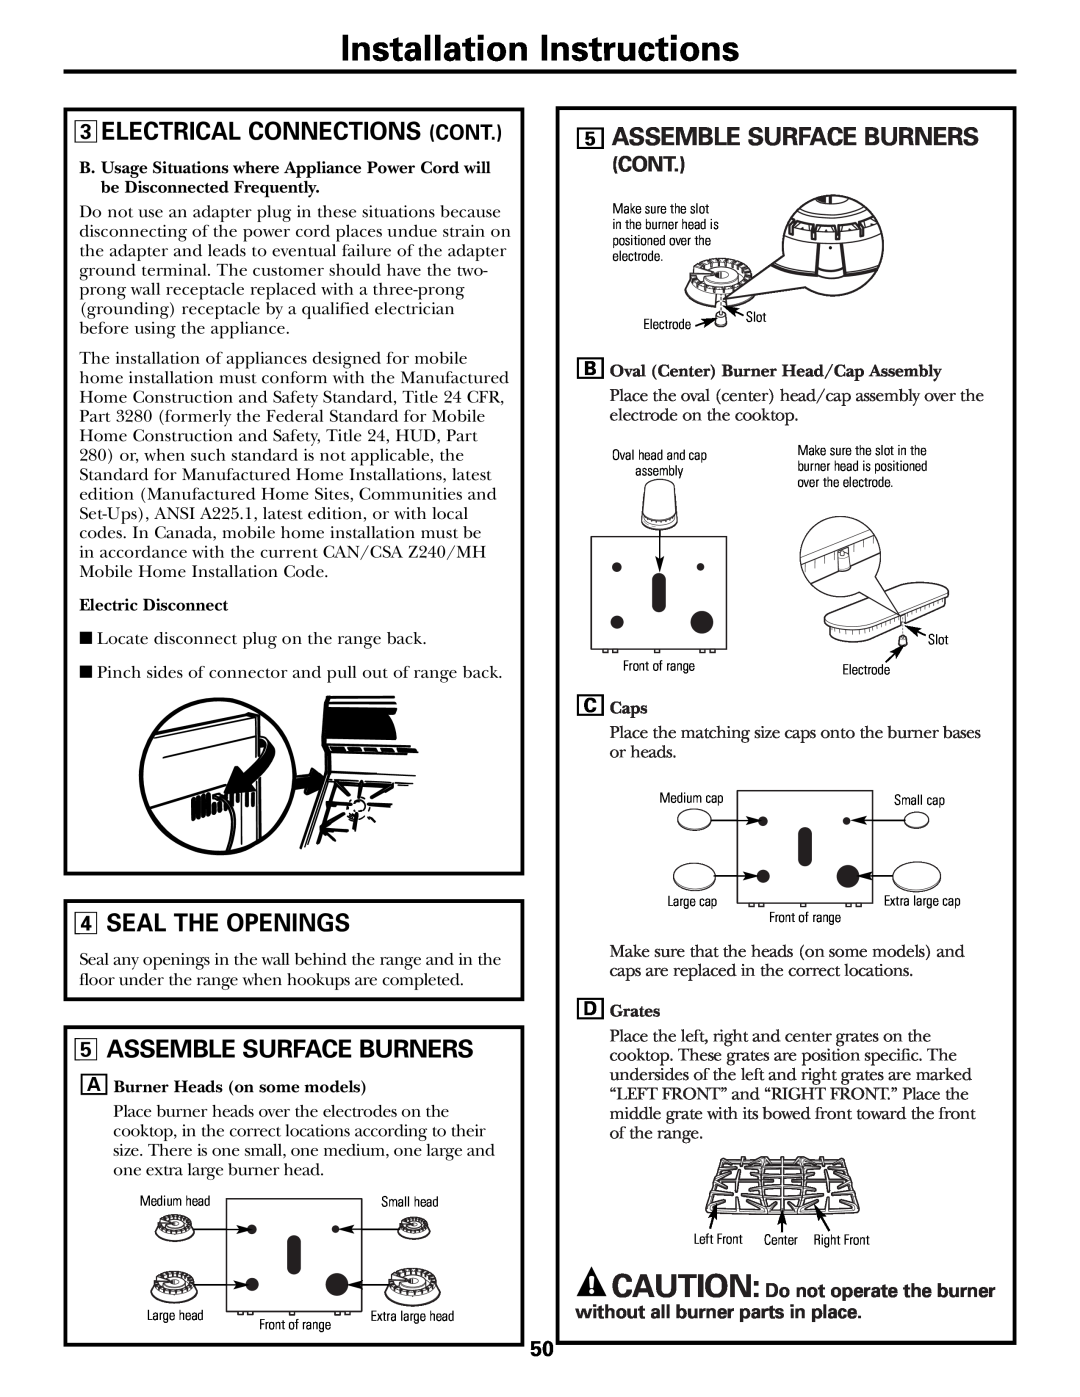 Mabe Canada JGBP86 installation instructions Assemble Surface Burners, Seal The Openings, Cont, Installation Instructions 